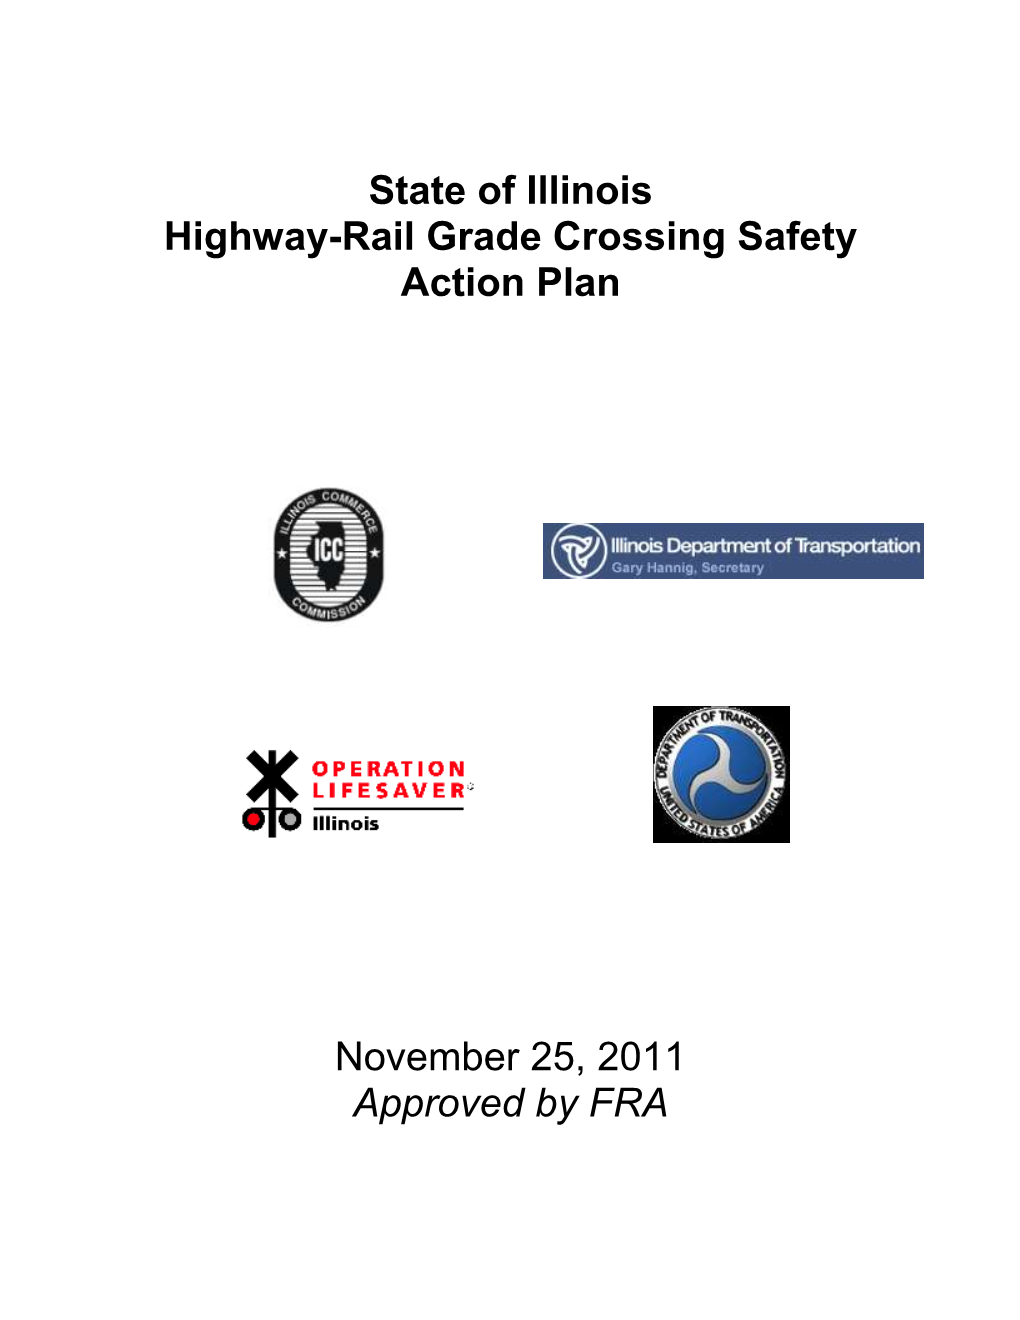 State of Illinois Highway-Rail Grade Crossing Safety Action Plan